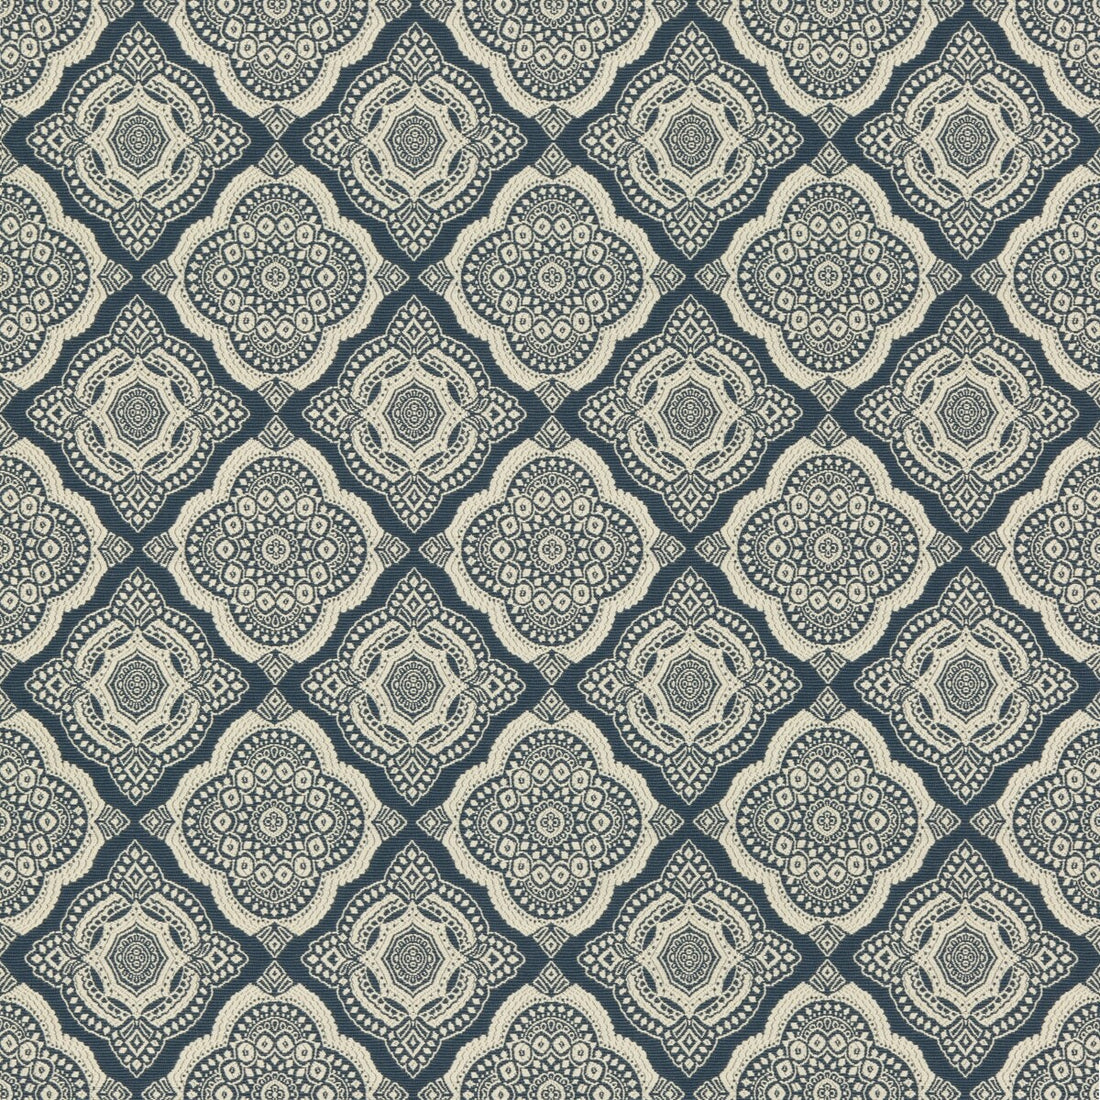 Kravet Design fabric in 34704-5 color - pattern 34704.5.0 - by Kravet Design in the Performance Crypton Home collection